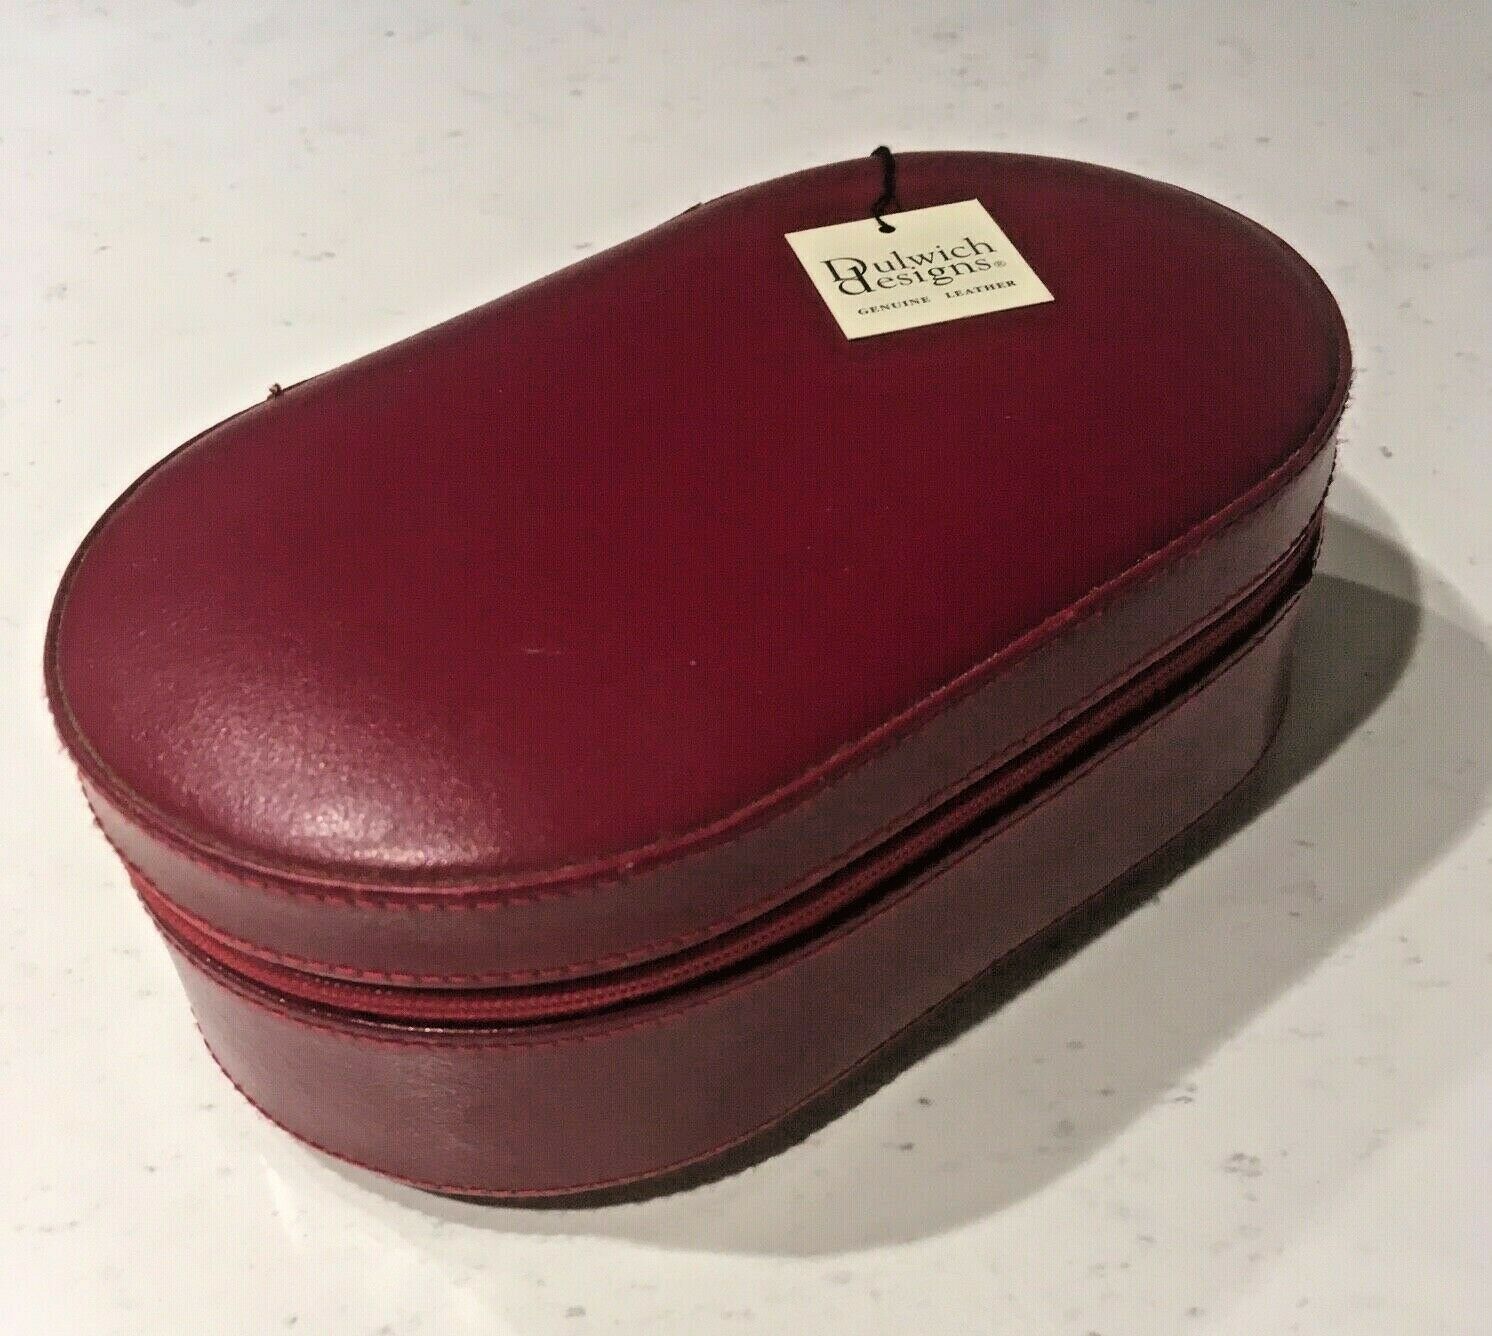 Dulwich Designs Leather Jewelry Zipper Travelcase Hidden Snap Mirror Compartment